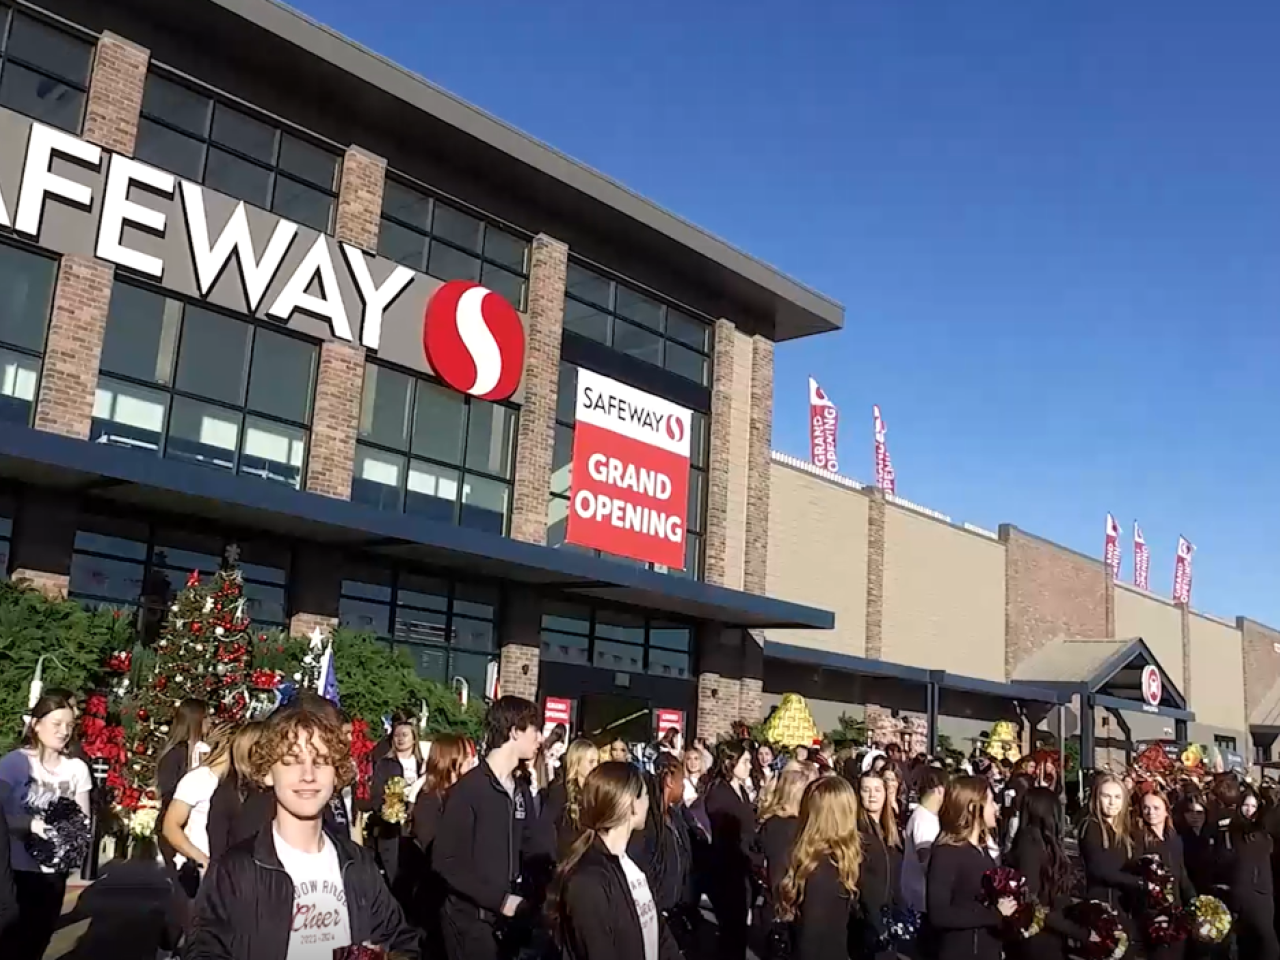 Crowd outside of new Safeway store in Suprise, AZ